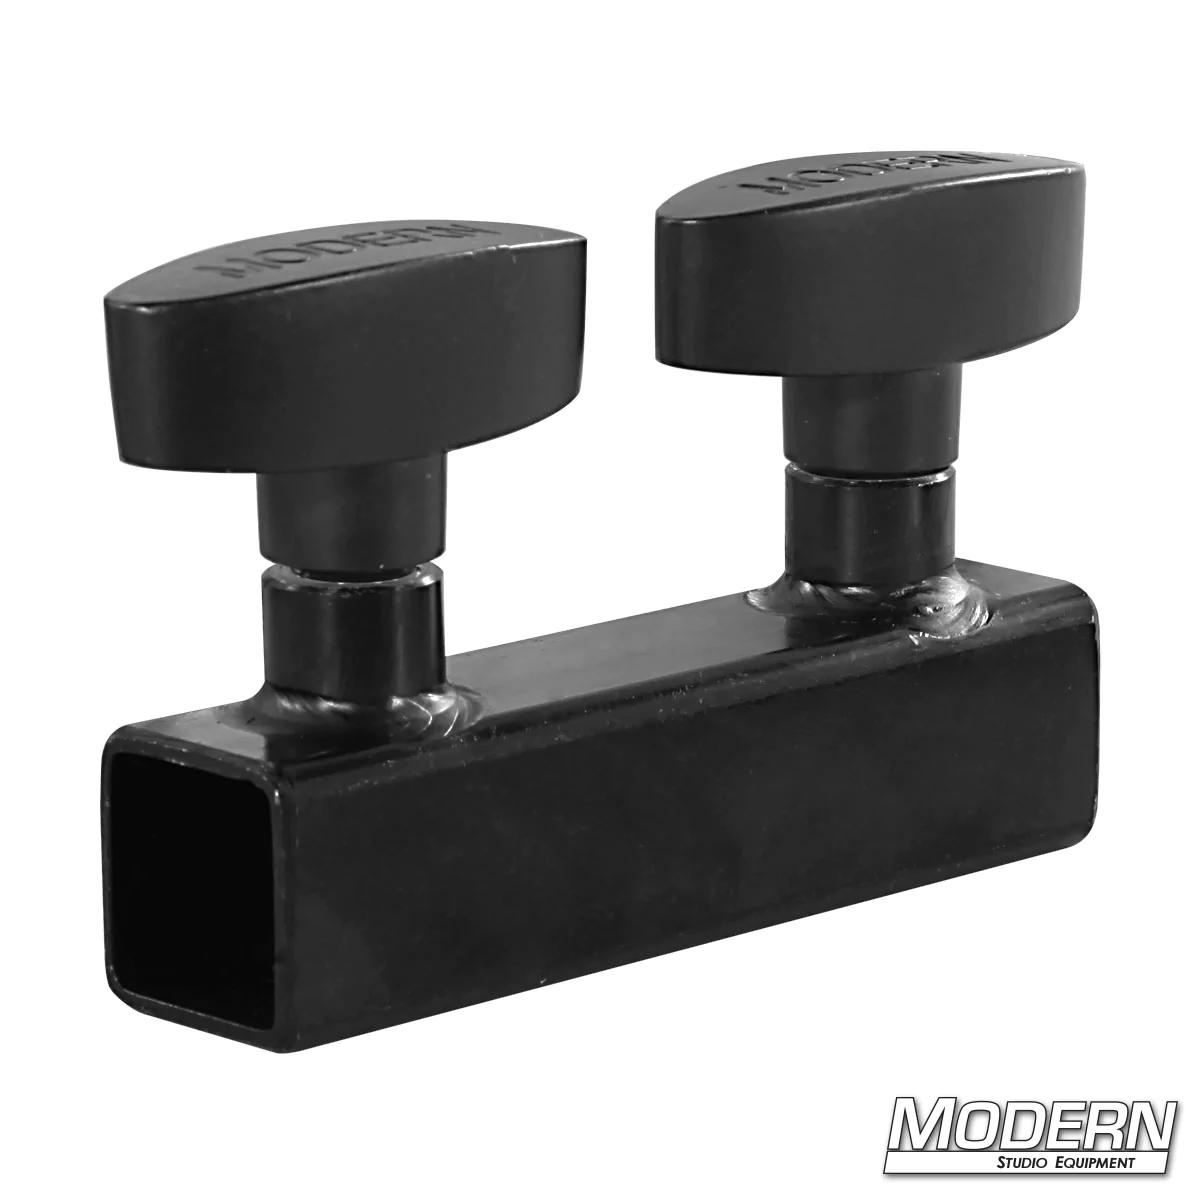 Sleeve for 3/4-inch Square Tube - Black Zinc with T-Handles